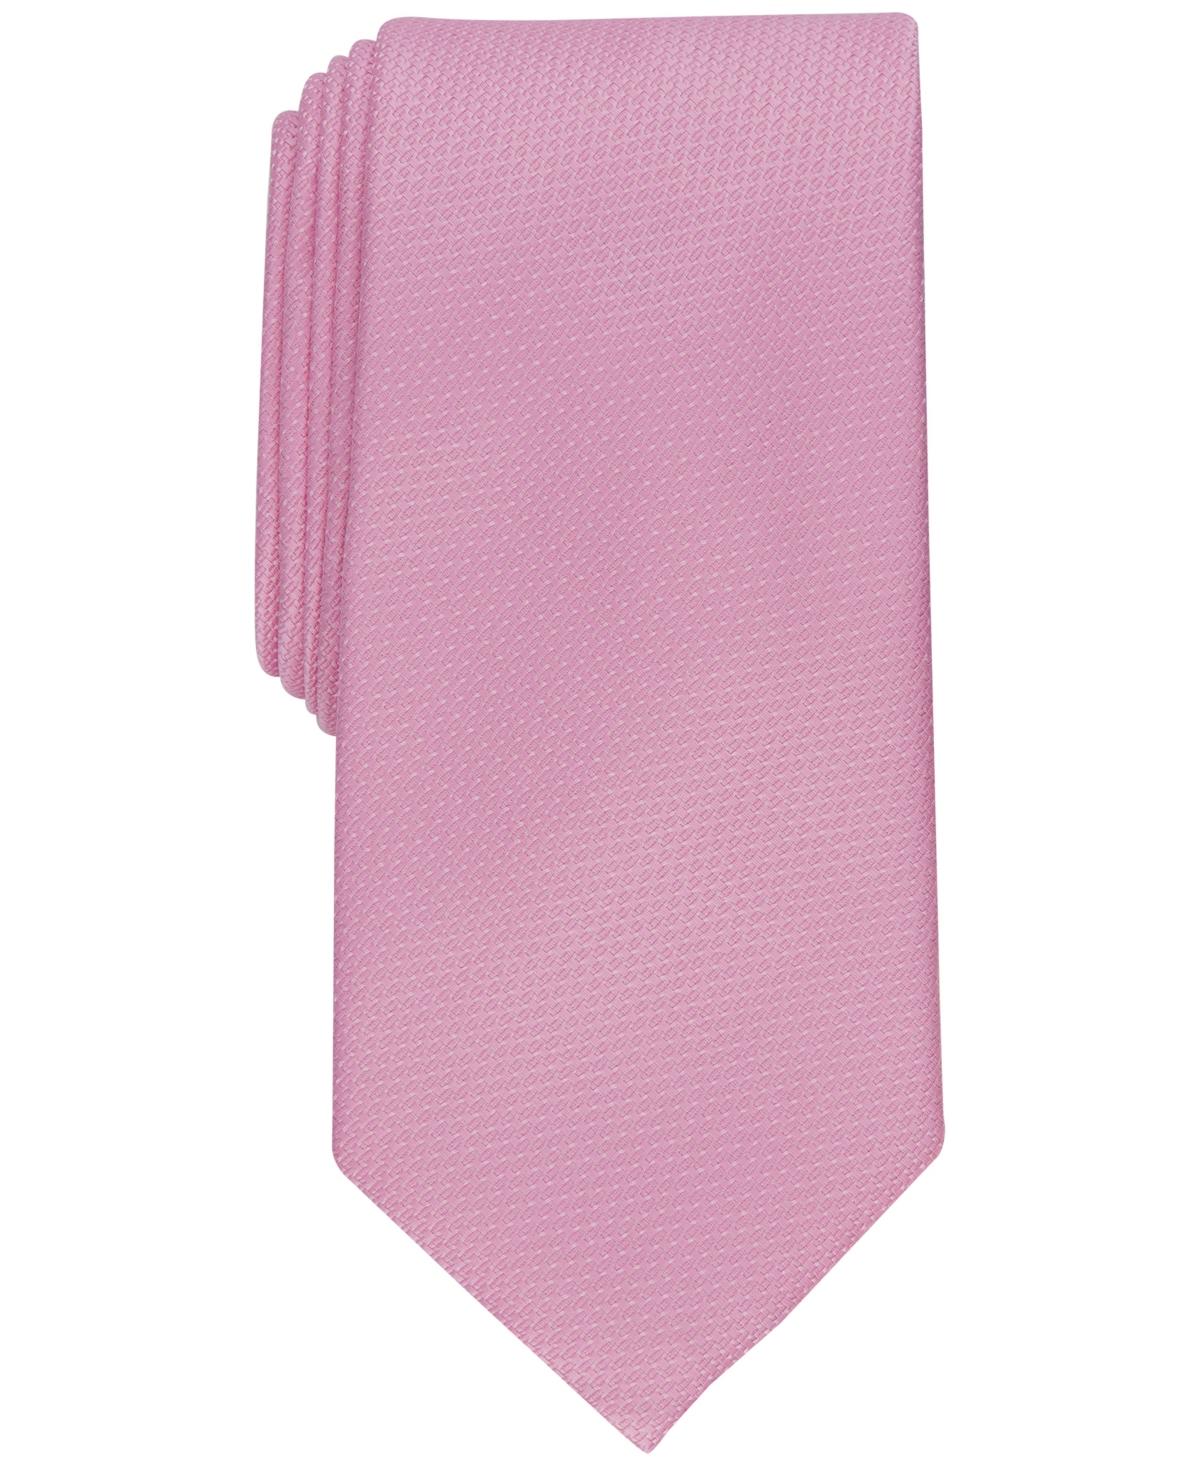 CLUB ROOM MEN'S HOLT SOLID TIE, CREATED FOR MACY'S